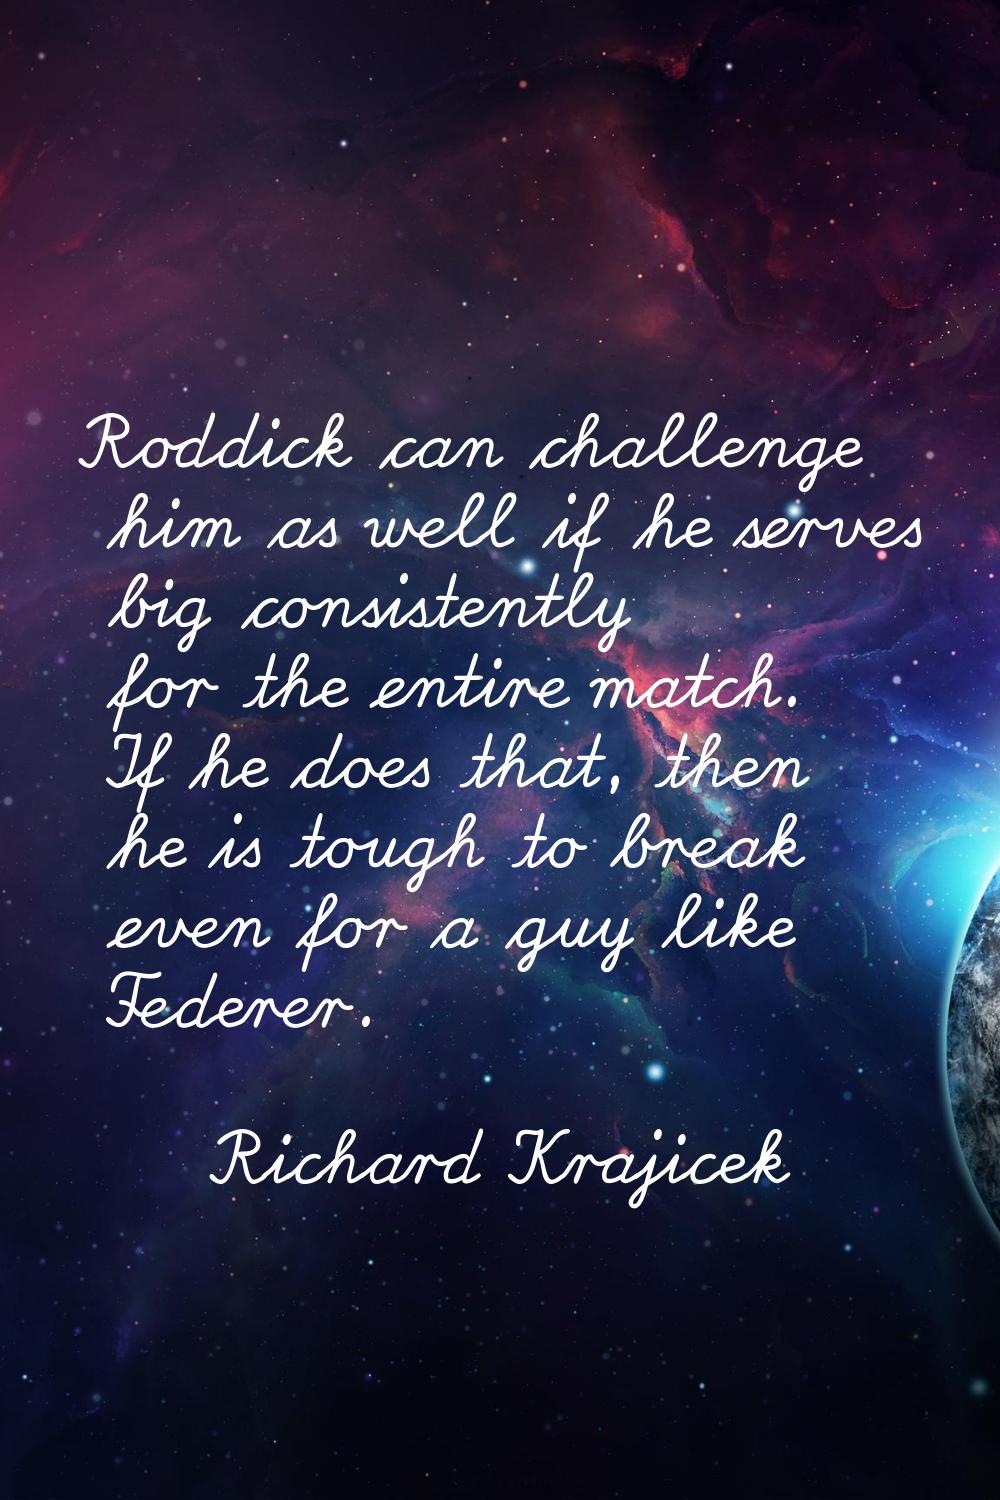 Roddick can challenge him as well if he serves big consistently for the entire match. If he does th